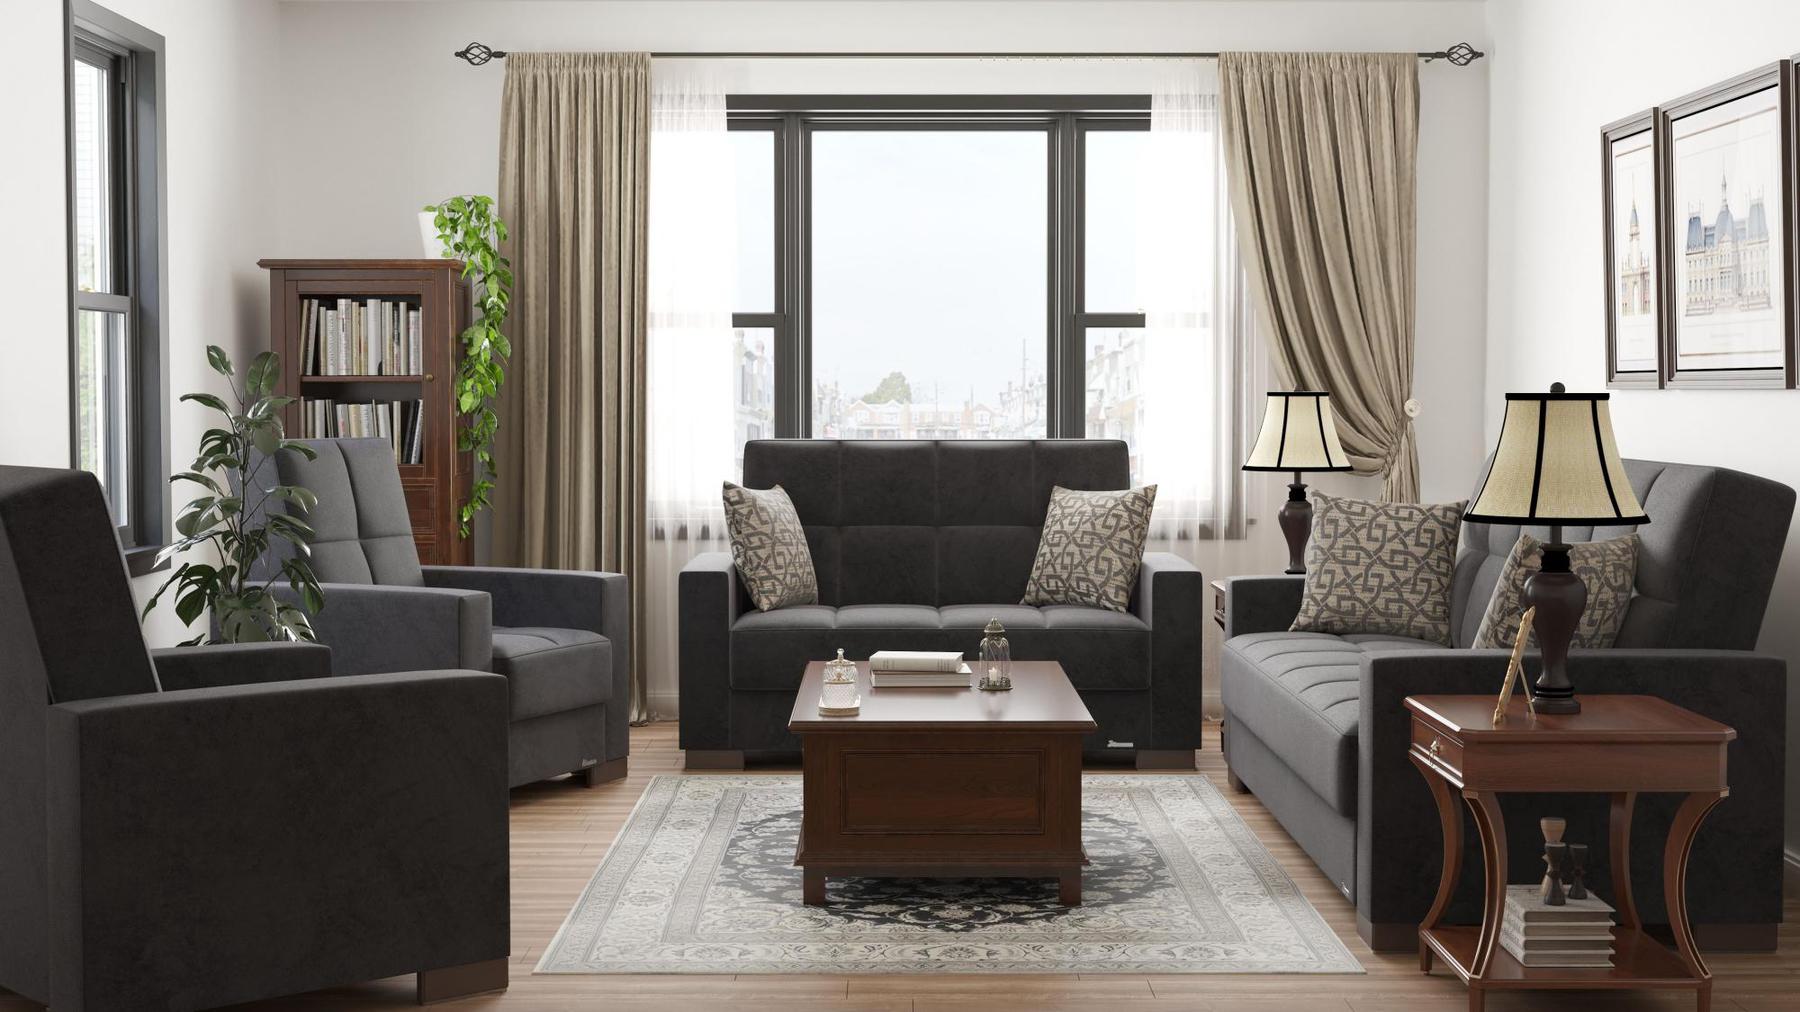 Modern design, Black , Microfiber upholstered convertible sleeper Sofabed with underseat storage from Voyage Track by Ottomanson in living room lifestyle setting with the matching furniture set. This Sofabed measures 90 inches width by 36 inches depth by 41 inches height.